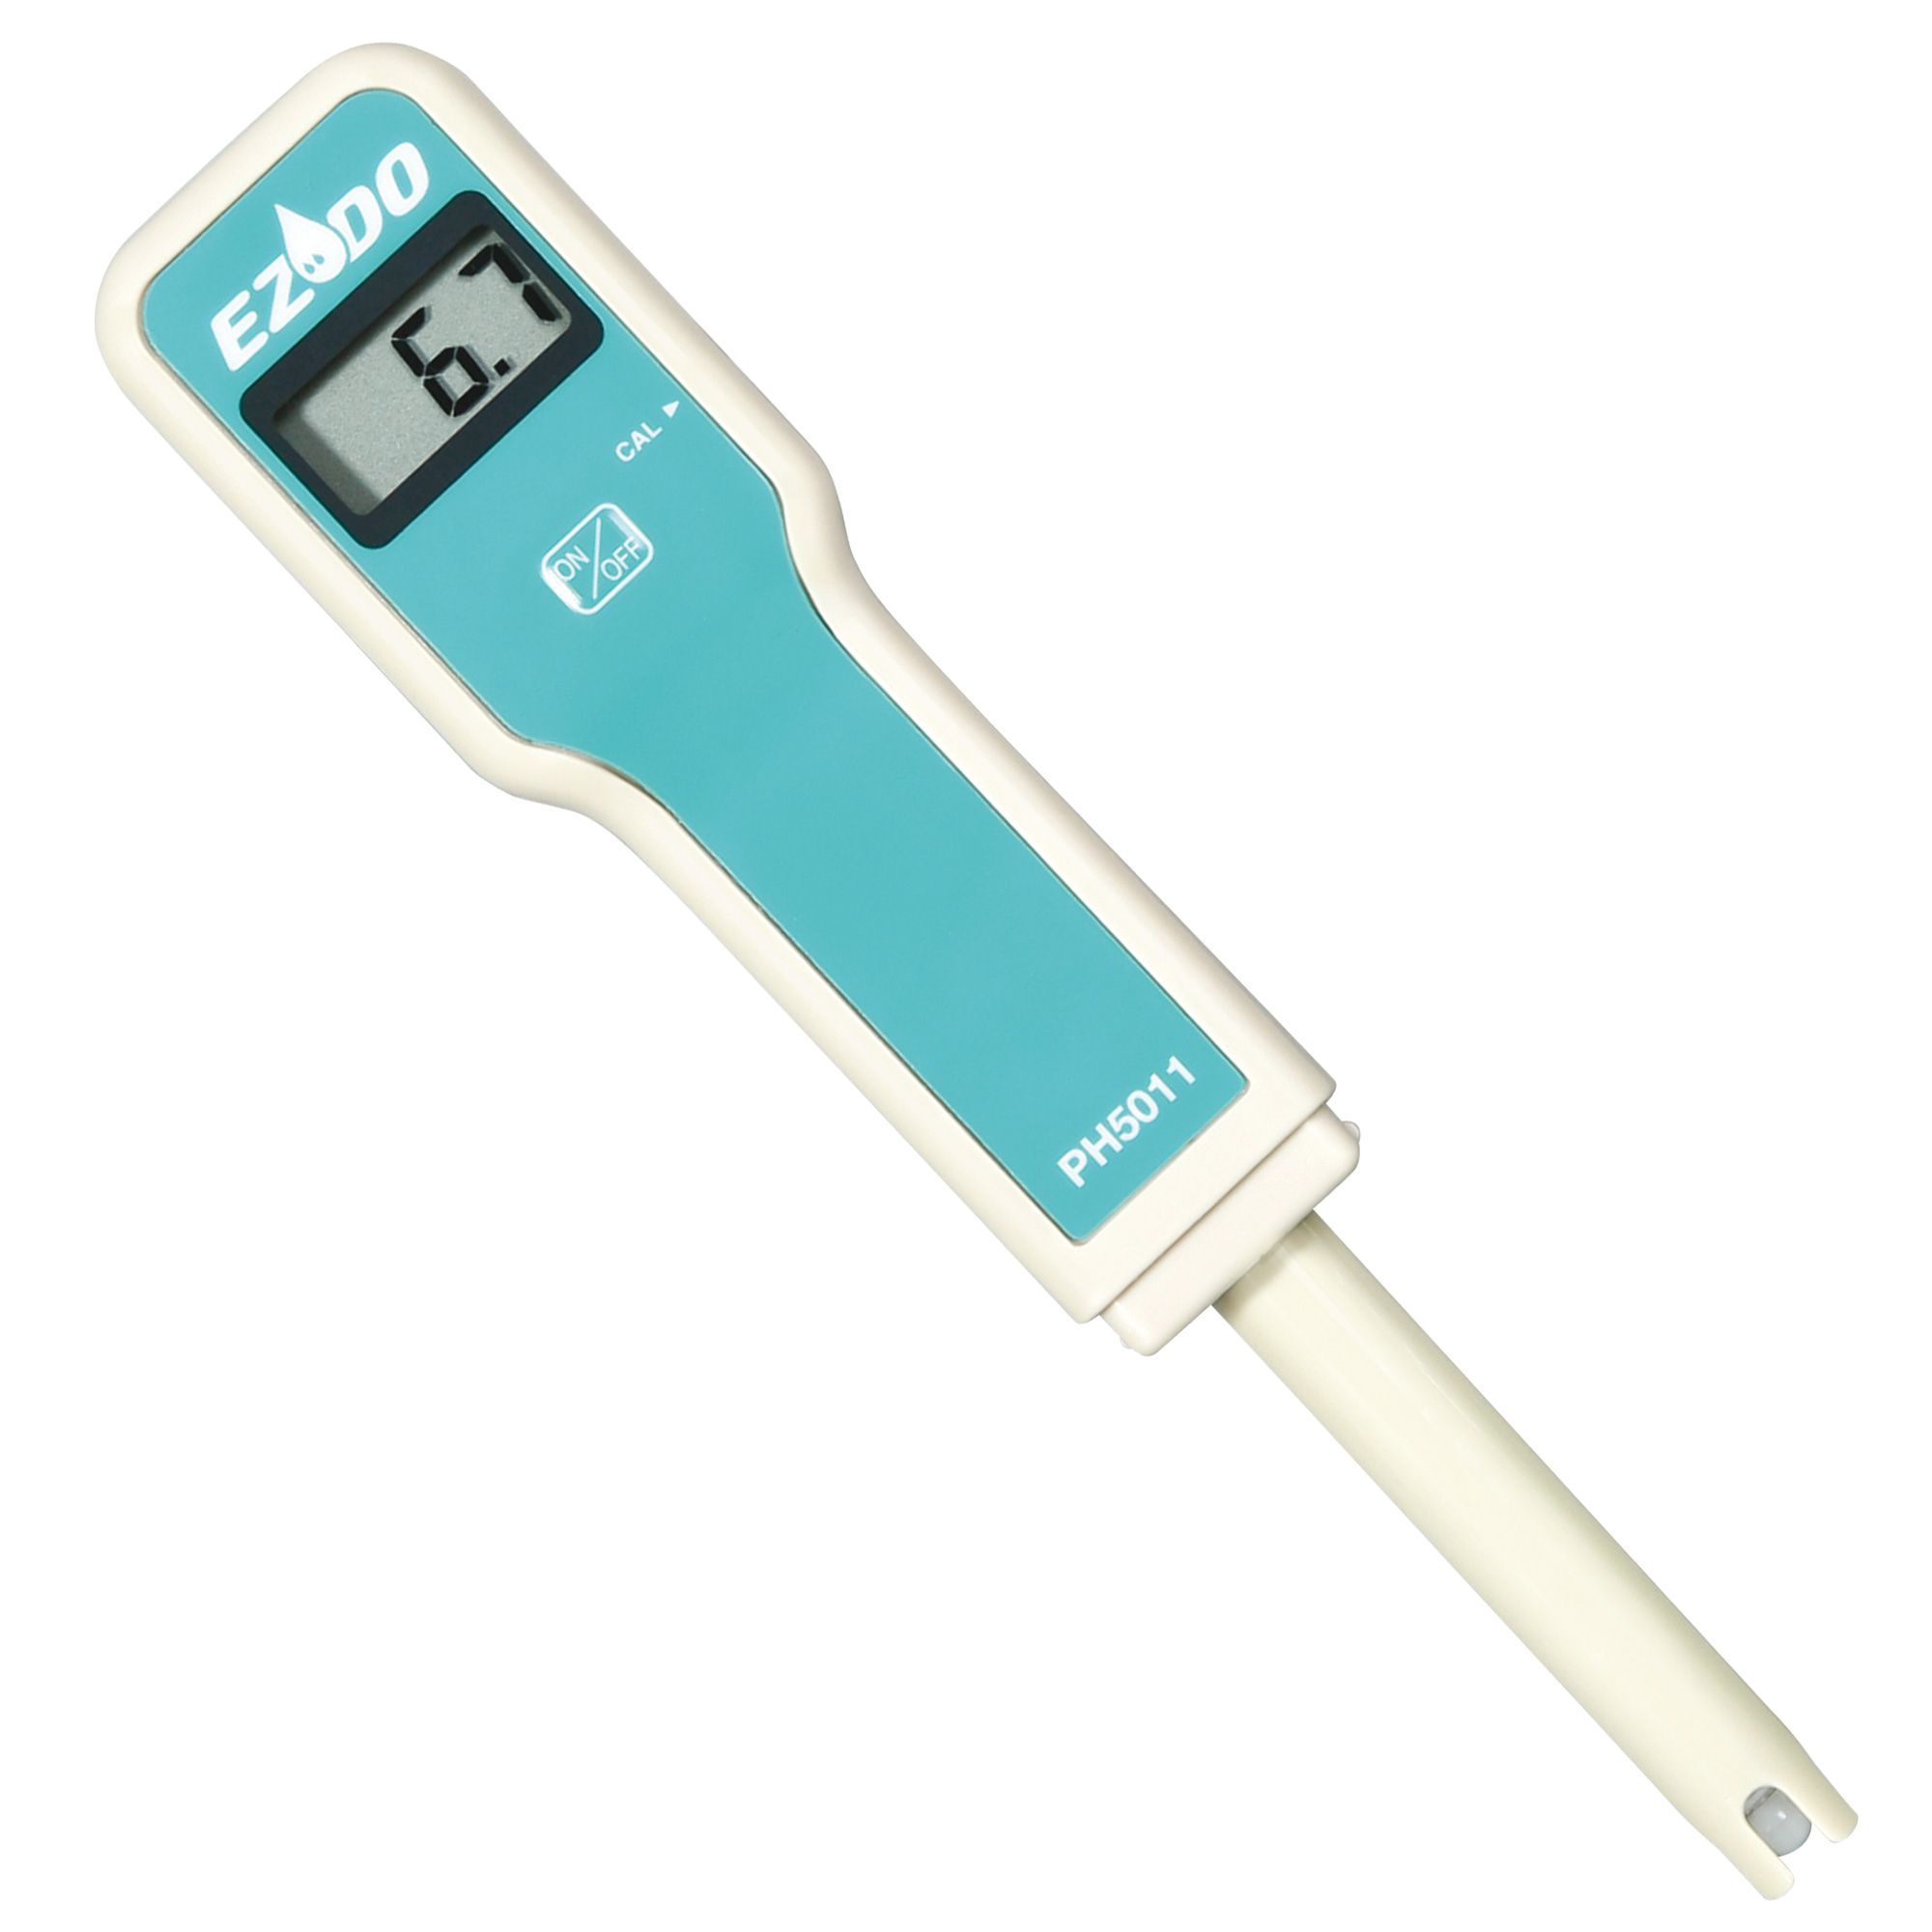 Mini Professional pH Meter Water Quality Tester Monitor Analysis Device N5G6 